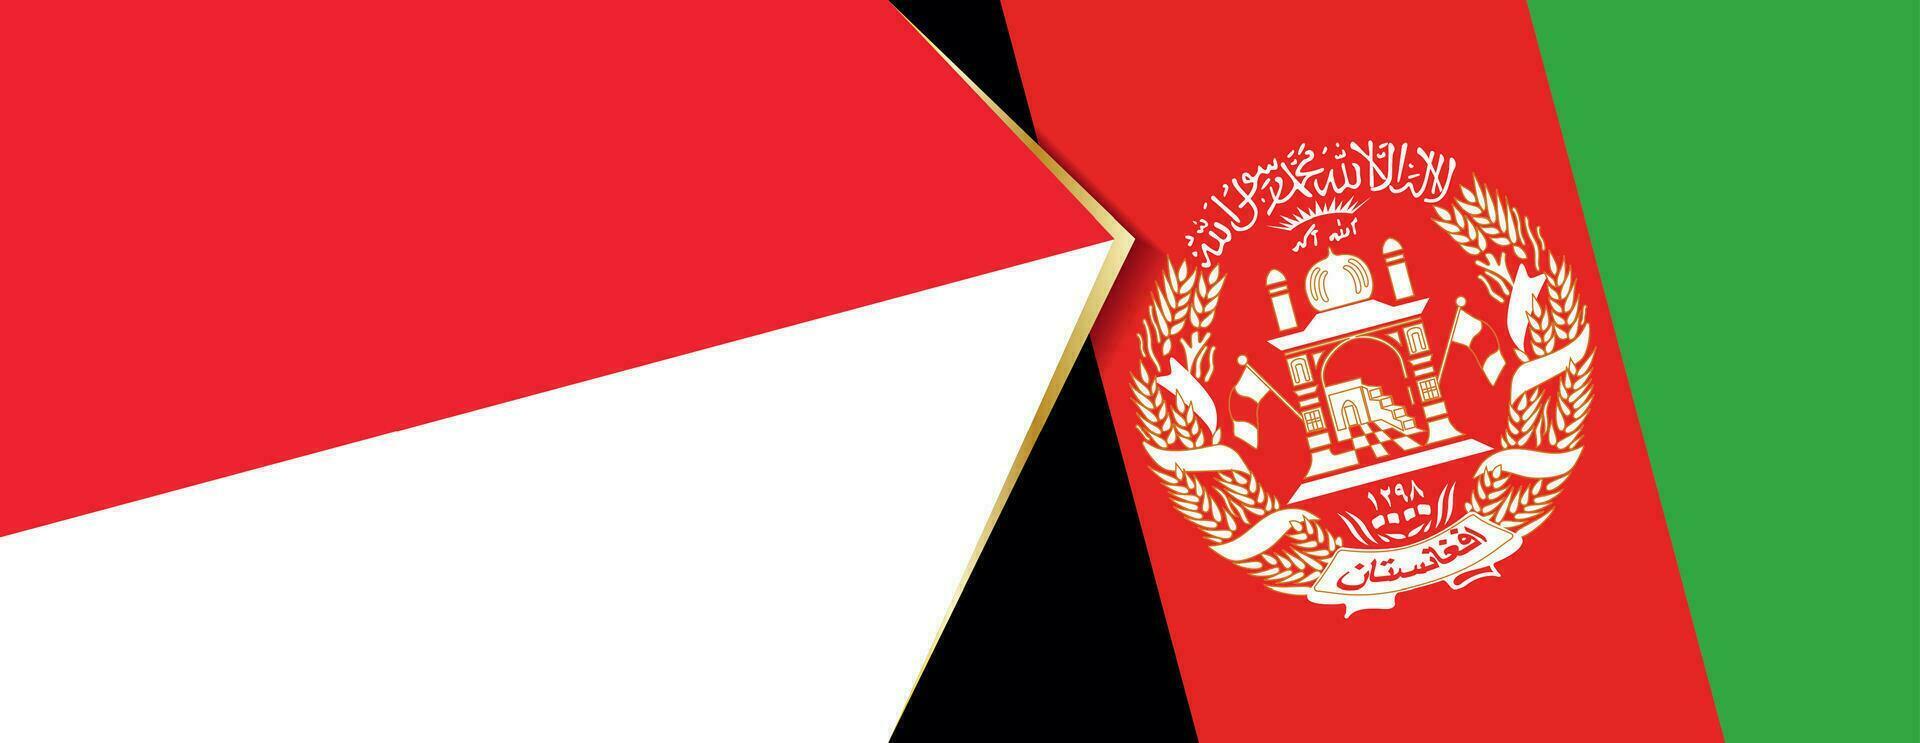 Indonesia e afghanistan bandiere, Due vettore bandiere.